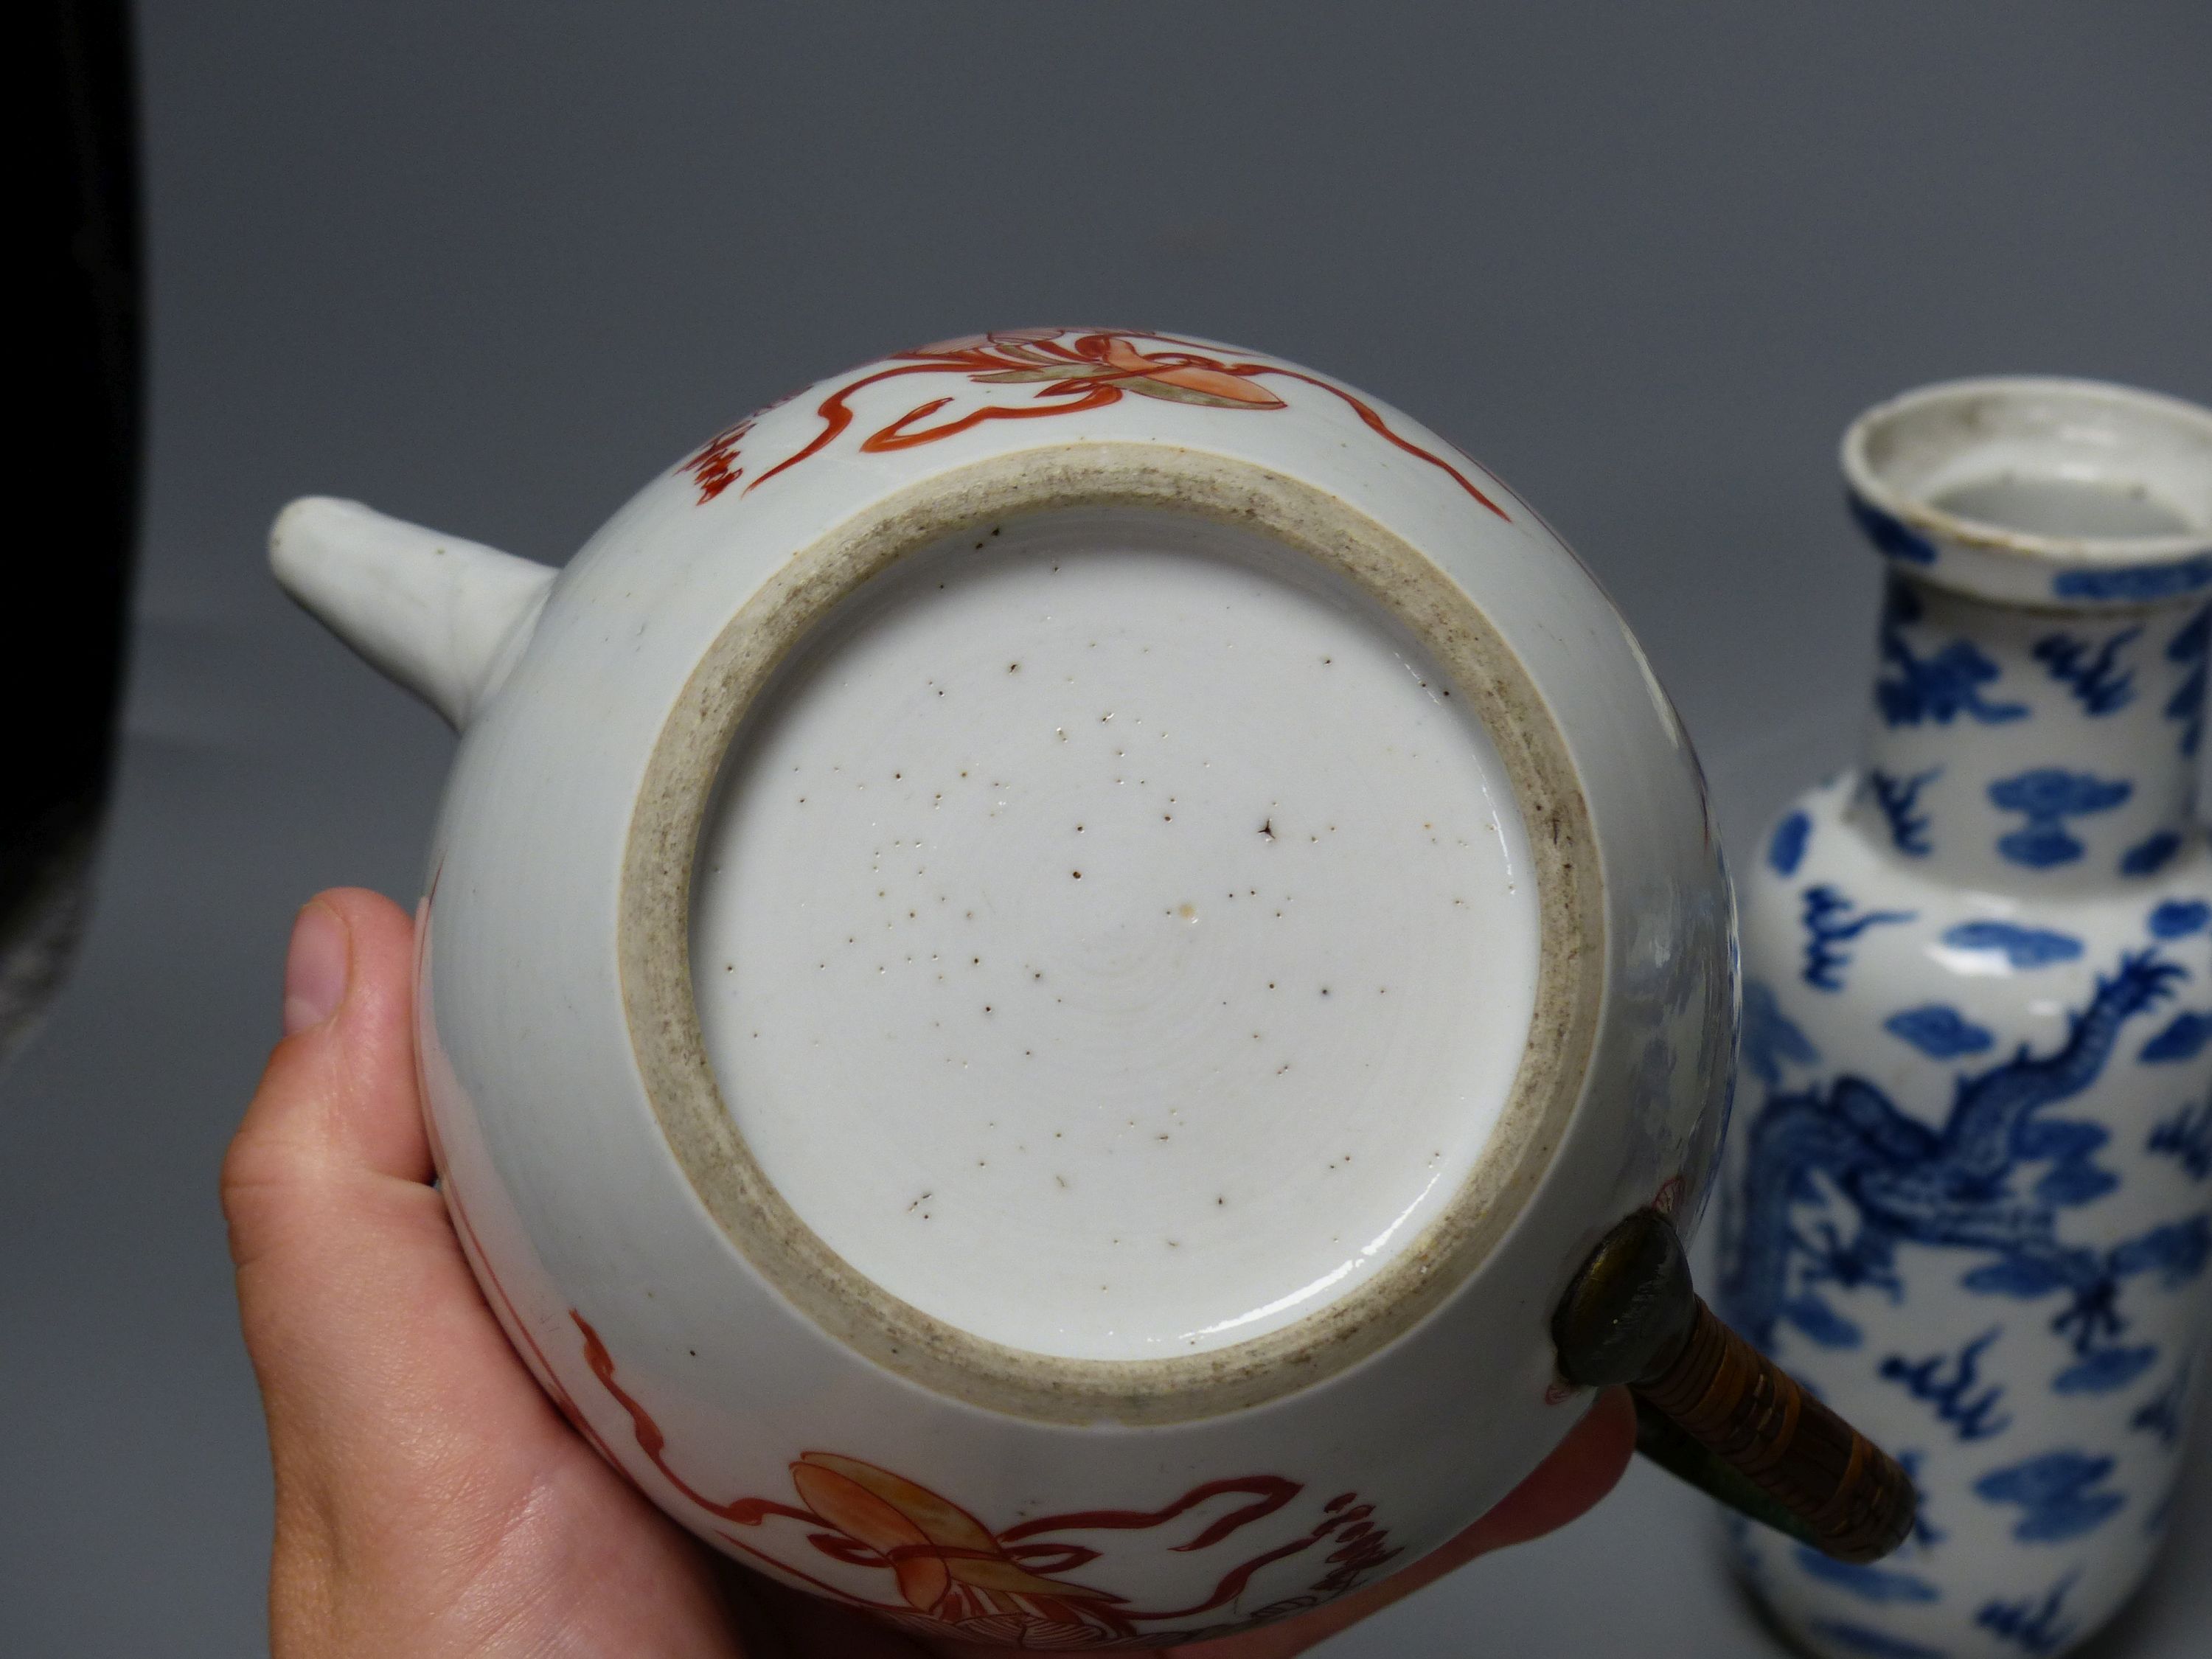 A 19th century Chinese blue and white covered jug, an early 20th century blue and white vase and a Kangxi rouge de fer teapot, tallest 18cm